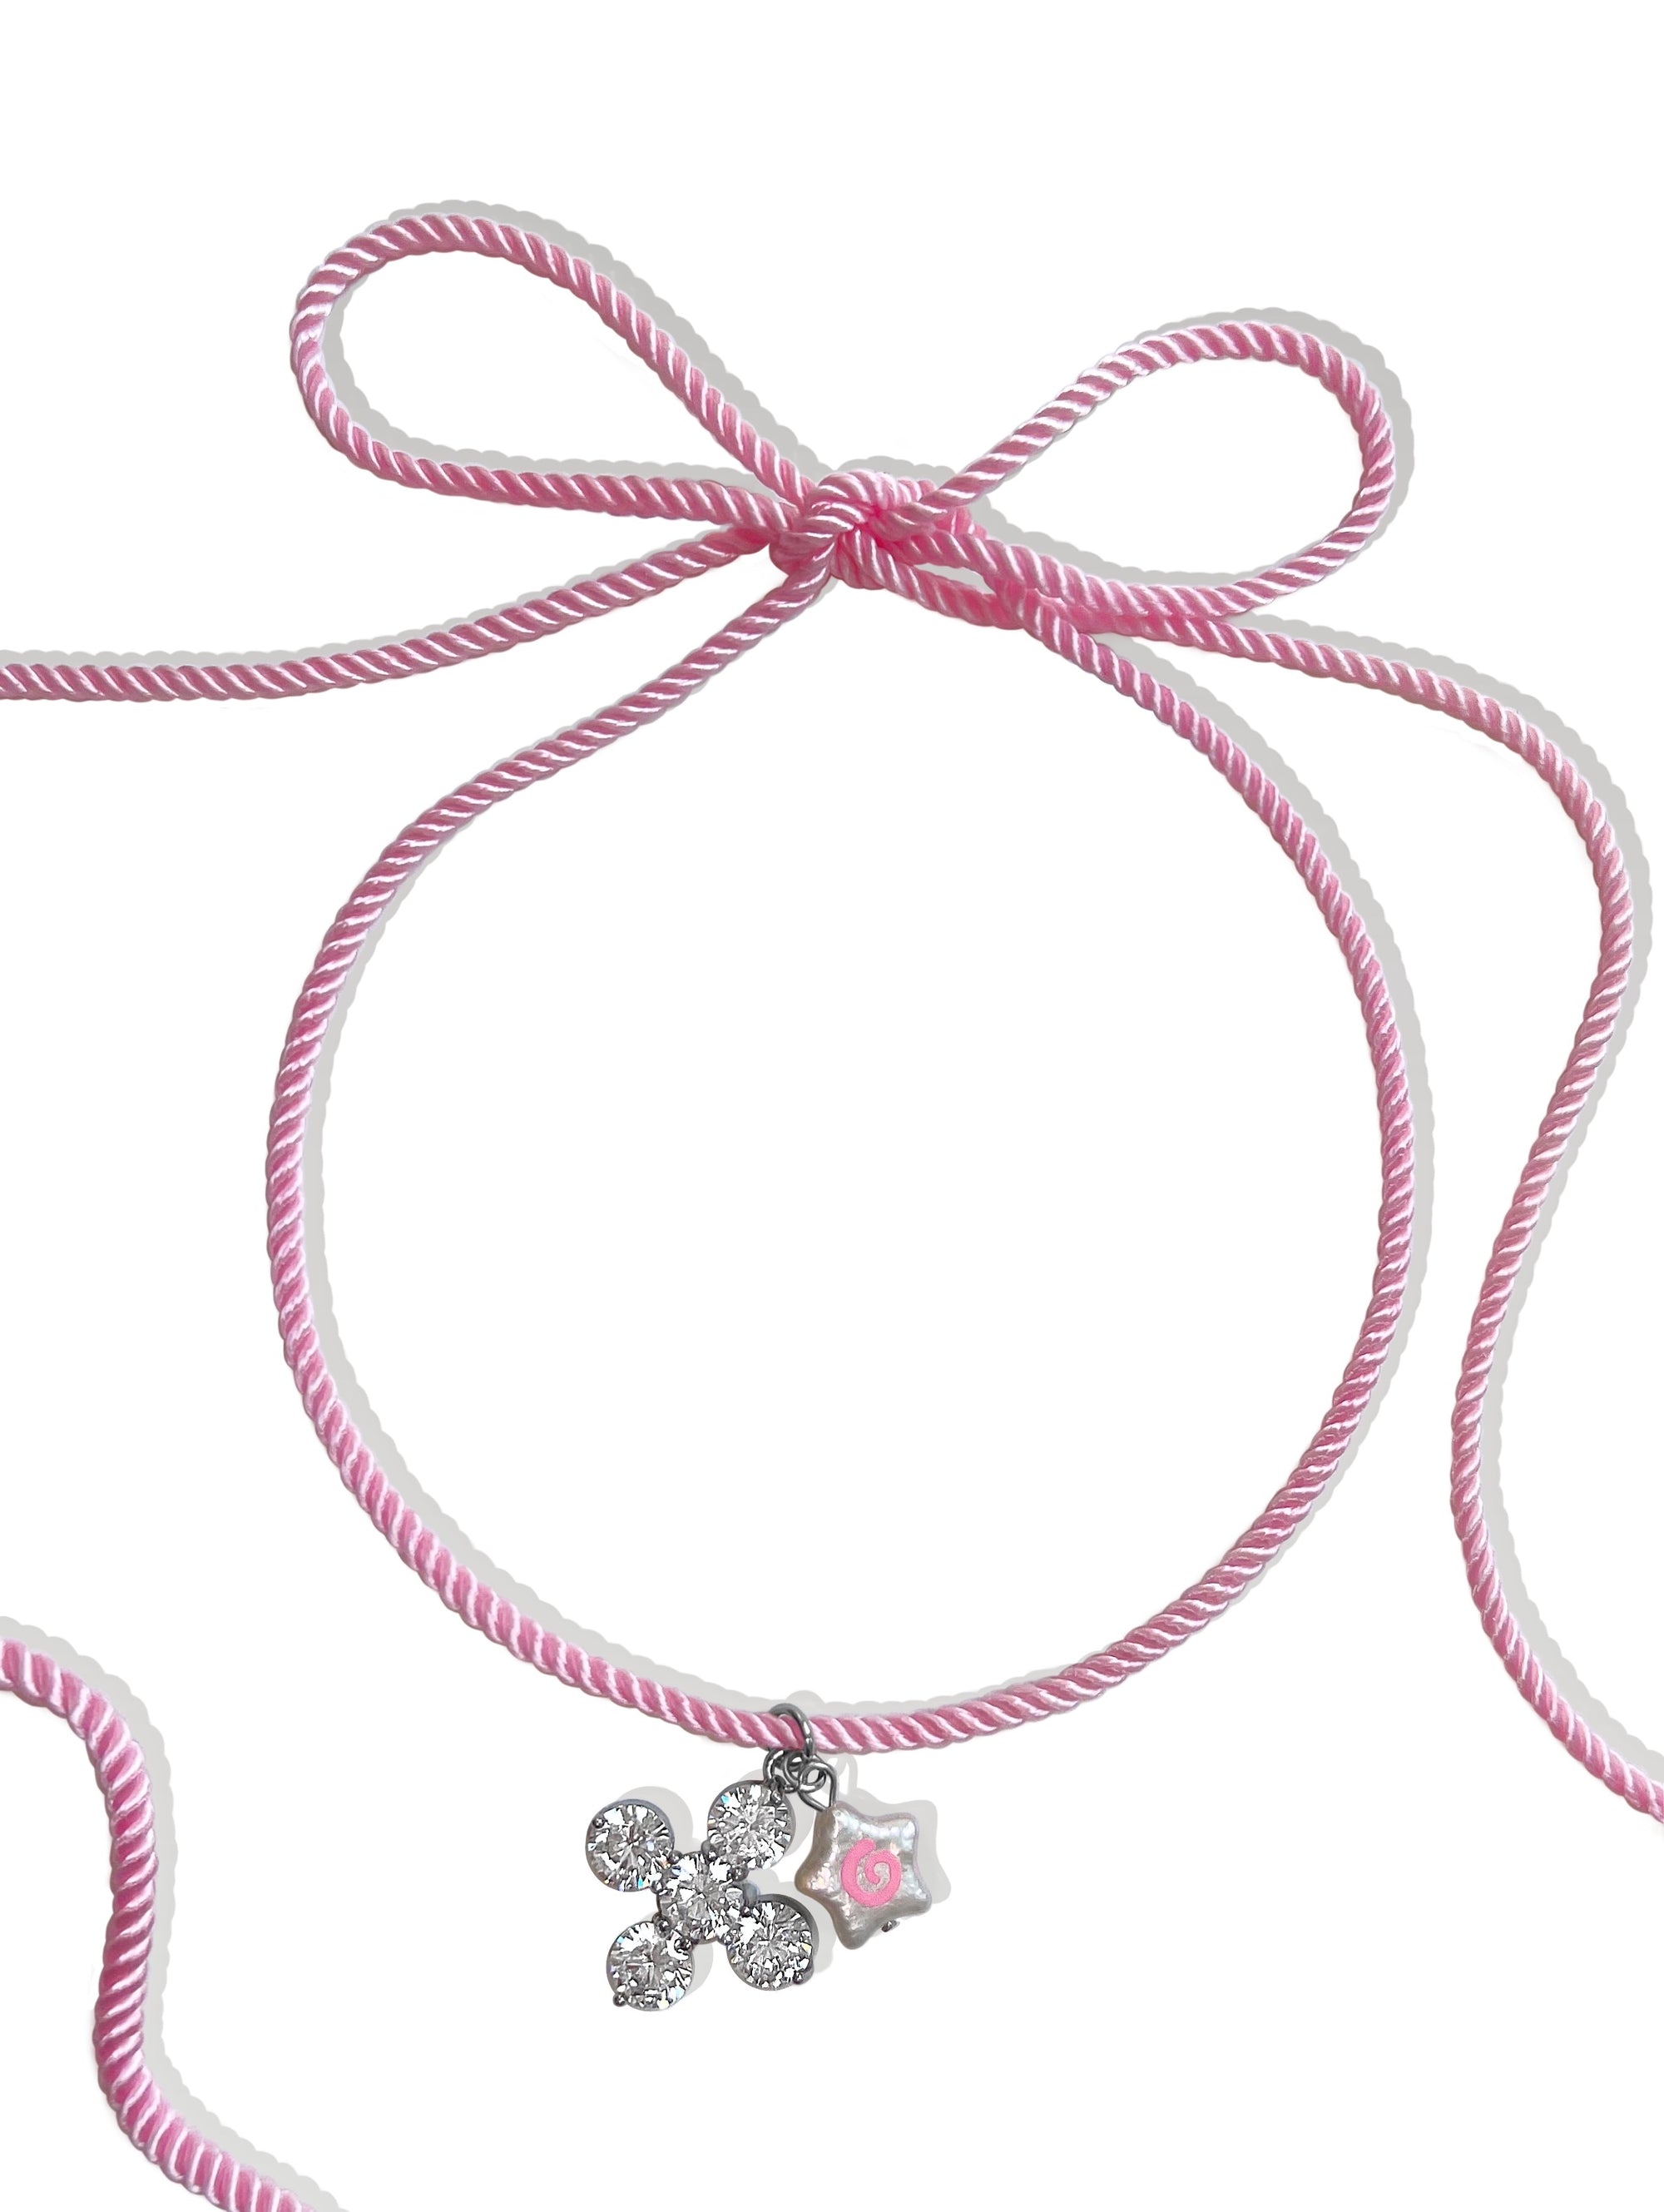 POLLY PINK SATIN CORD NECKLACE